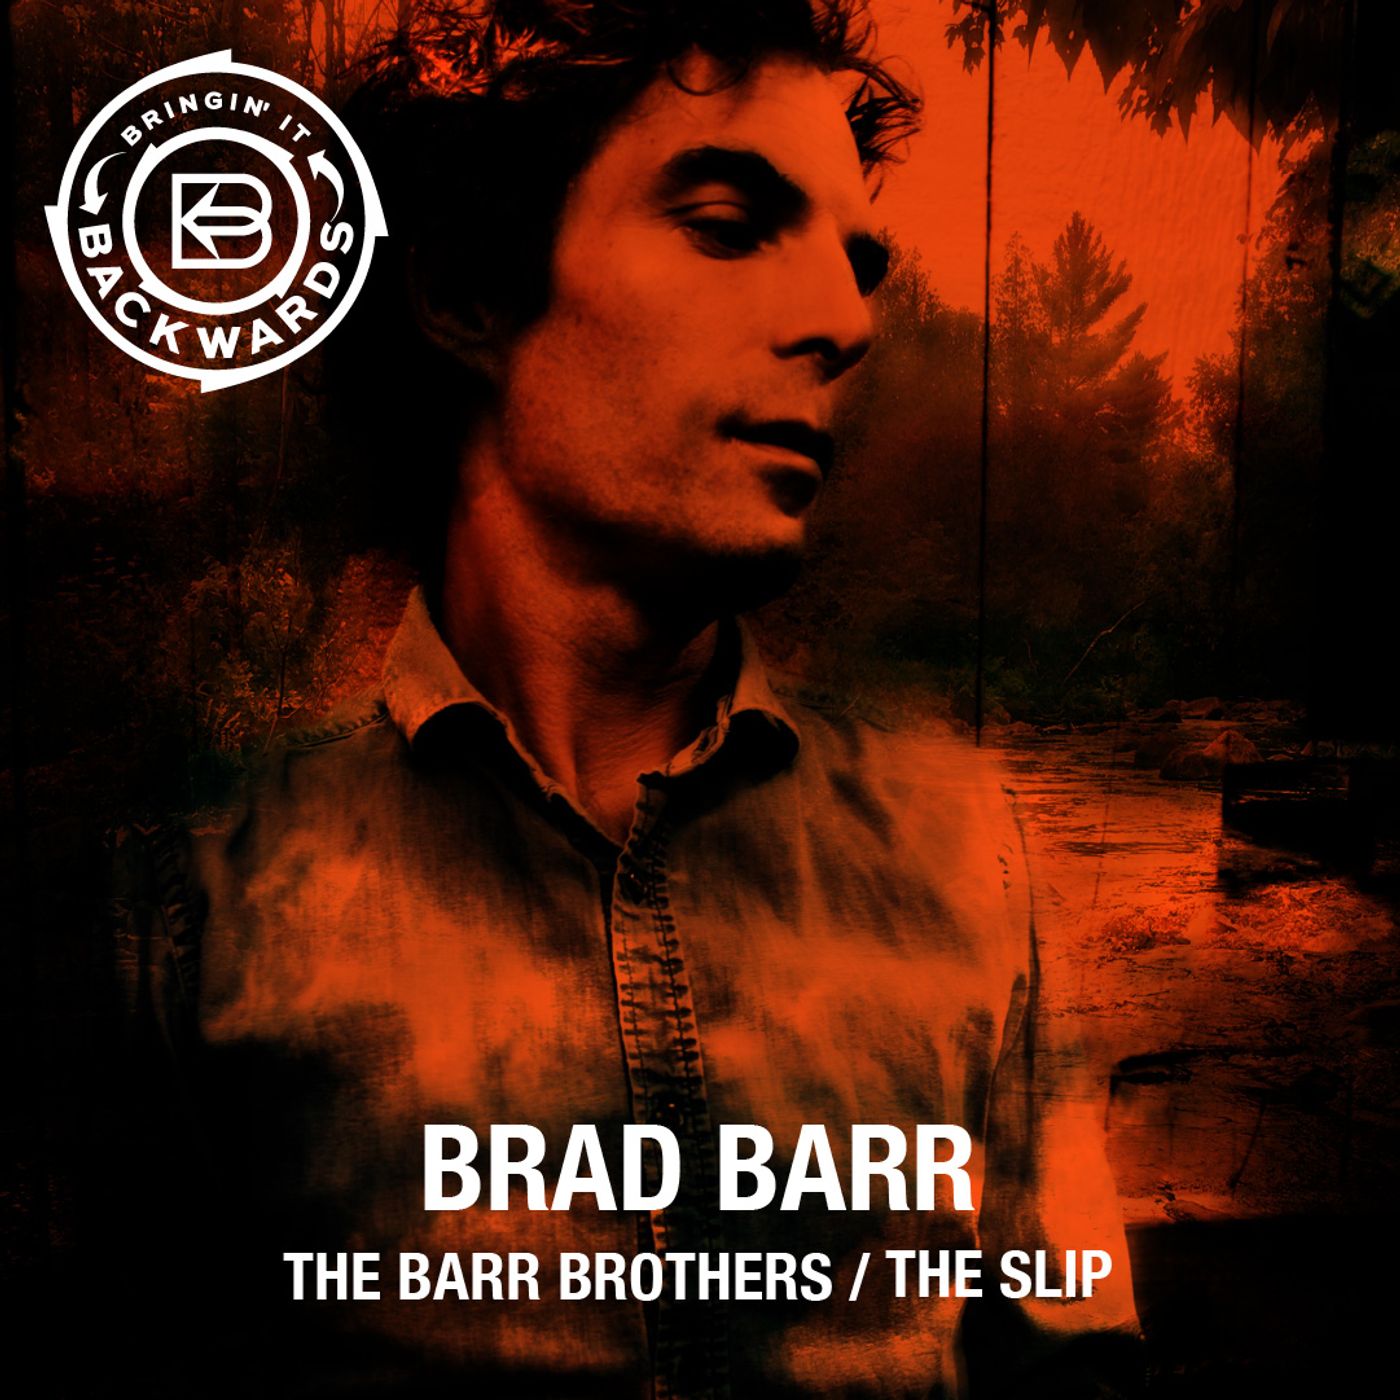 Interview with Brad Barr